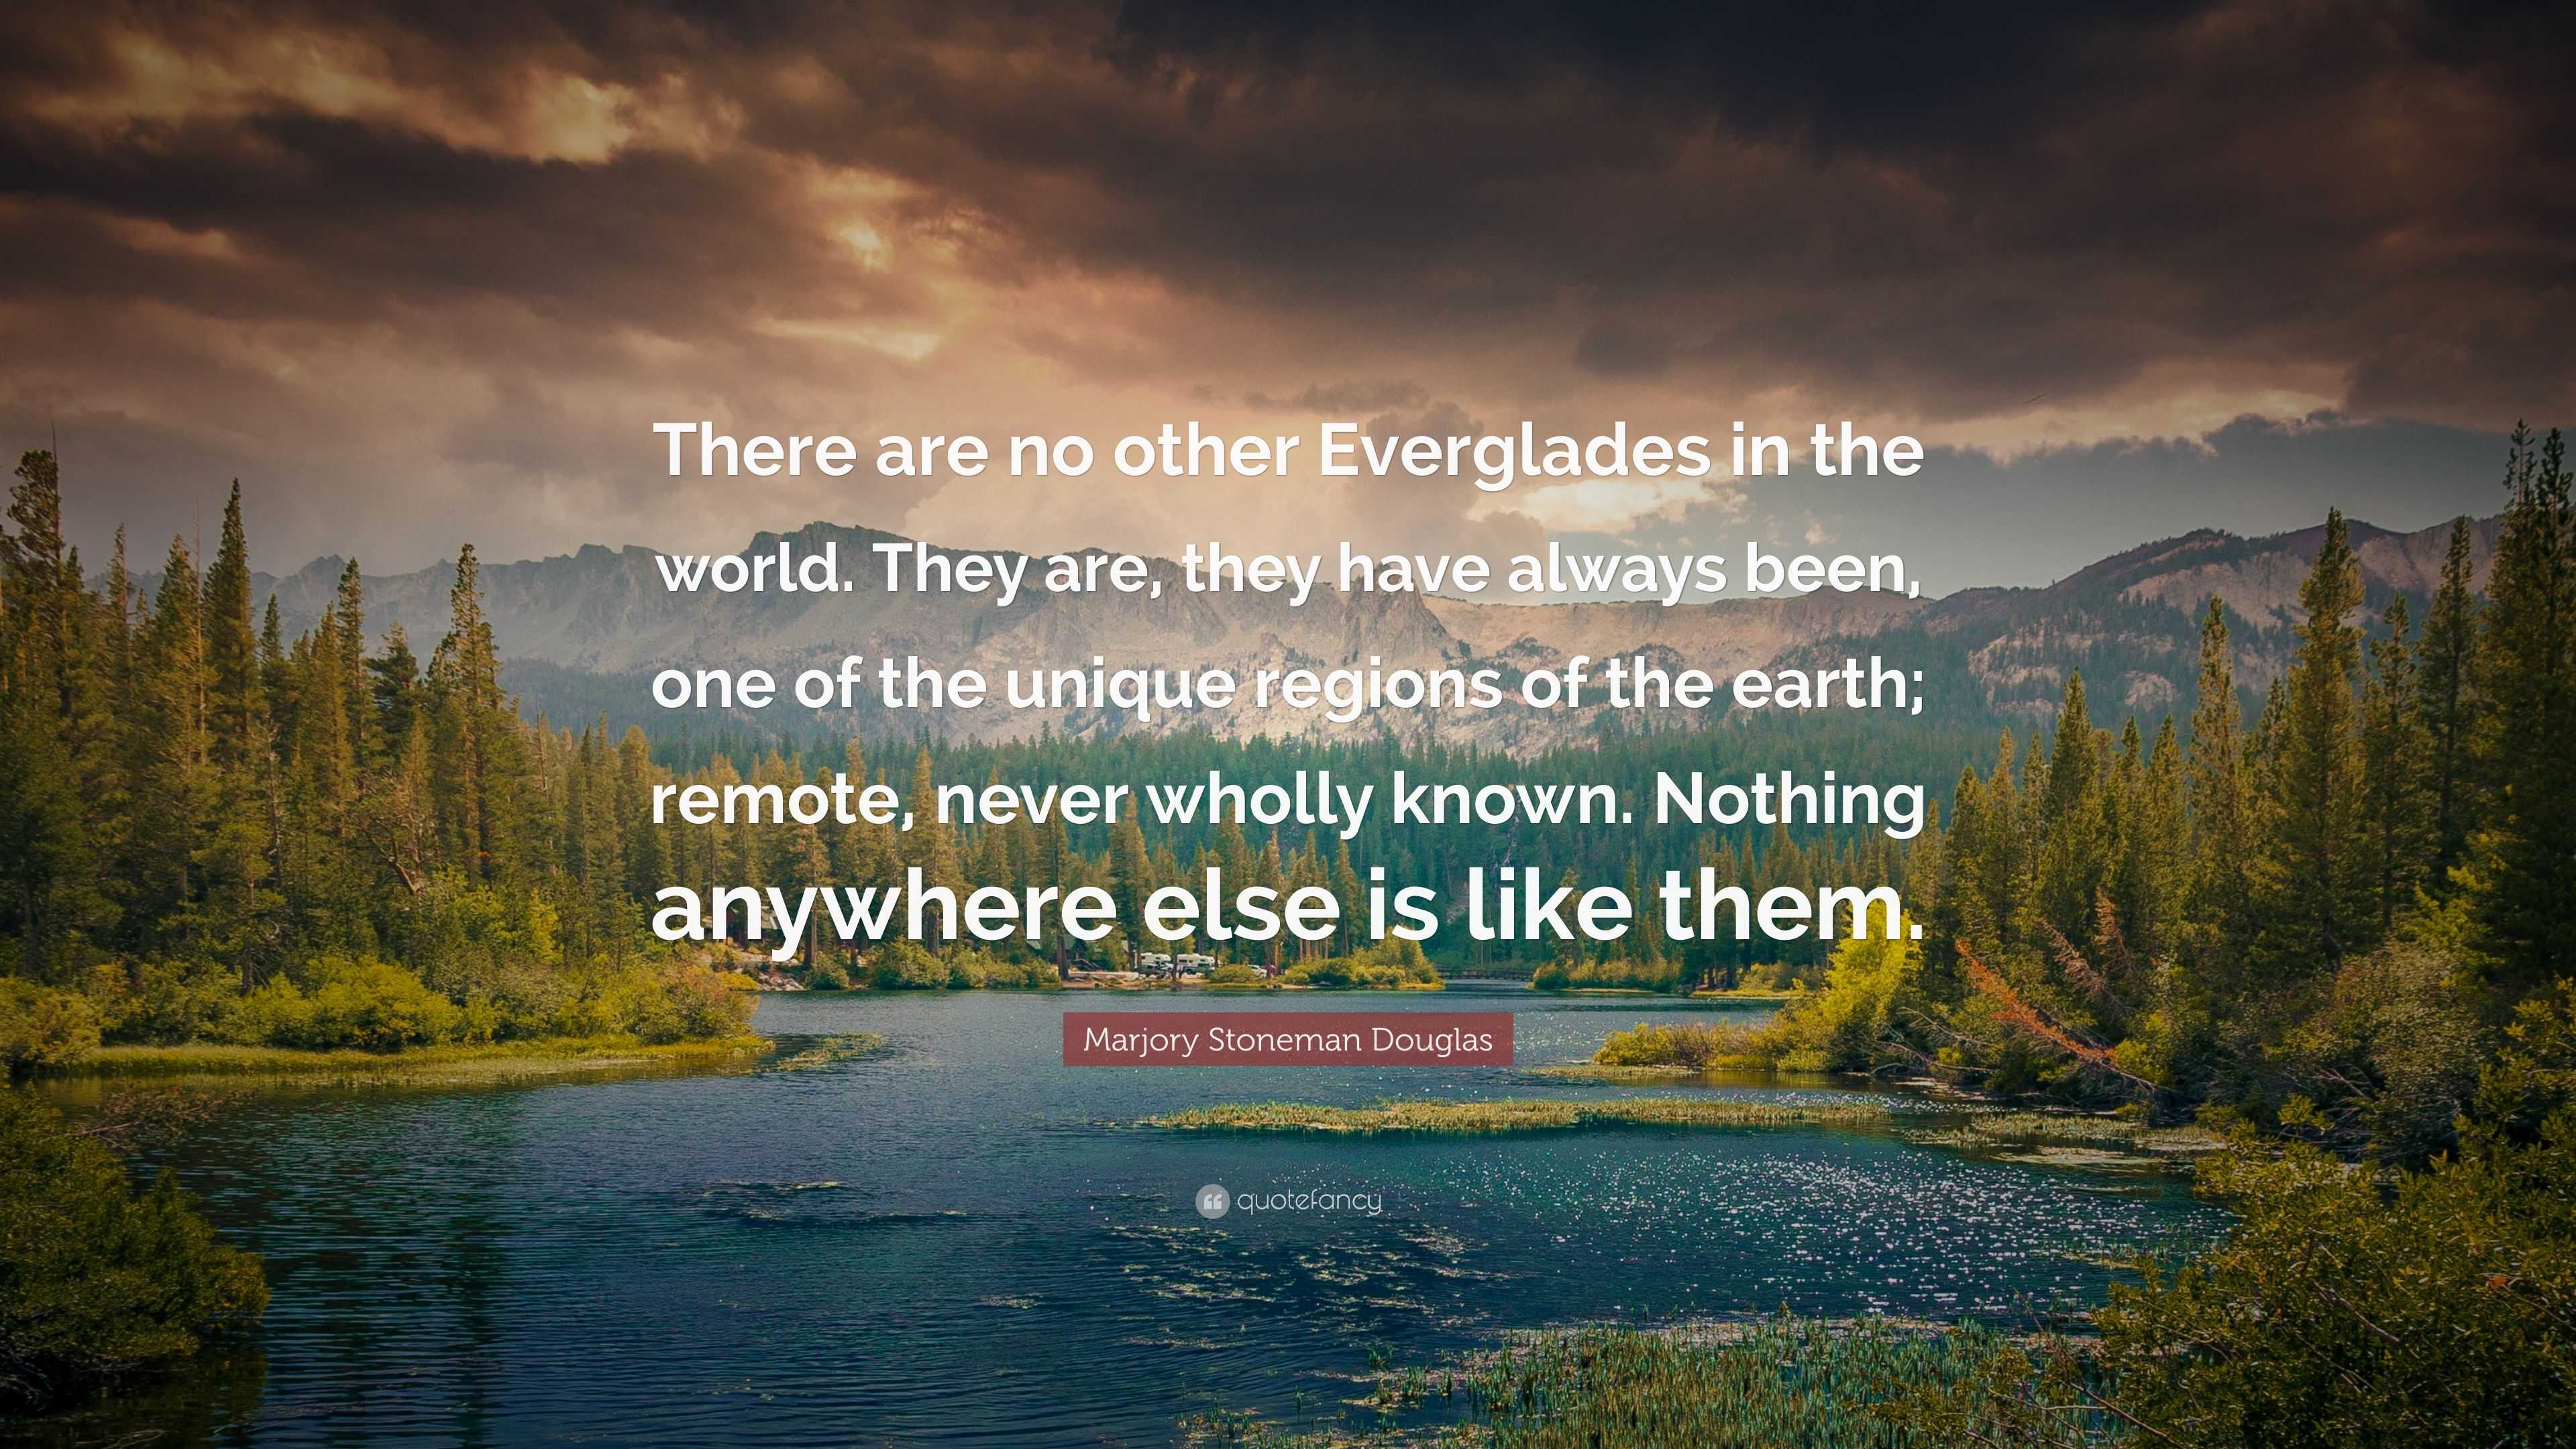 Marjory Stoneman Douglas Quote: “There are no other Everglades in the ...